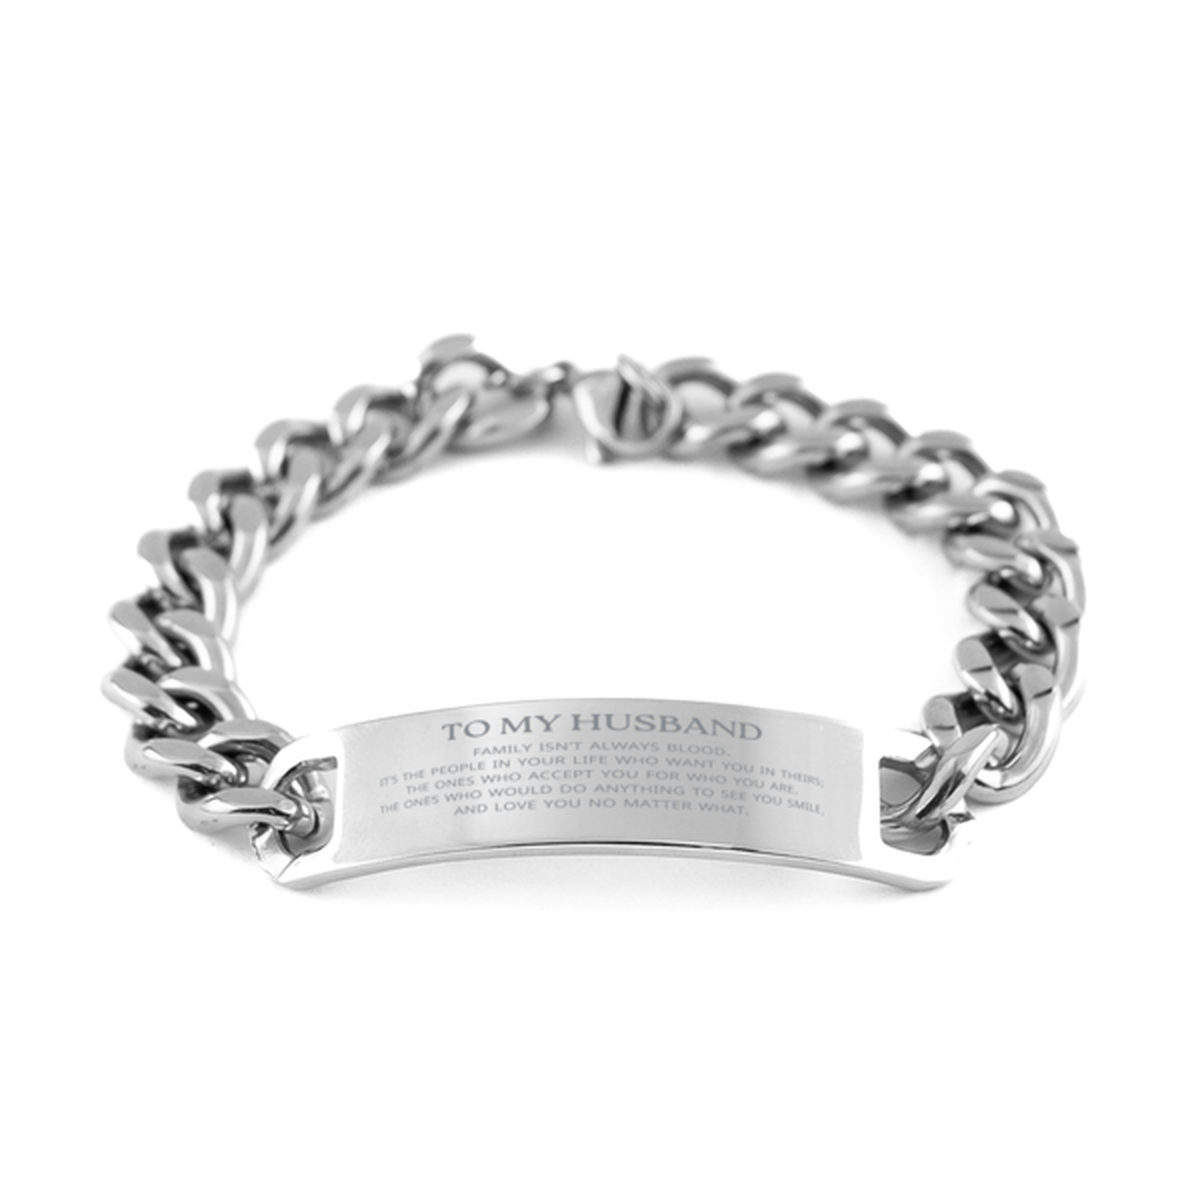 To My Husband Gifts, Family isn't always blood, Husband Cuban Chain Stainless Steel Bracelet, Birthday Christmas Unique Present For Husband